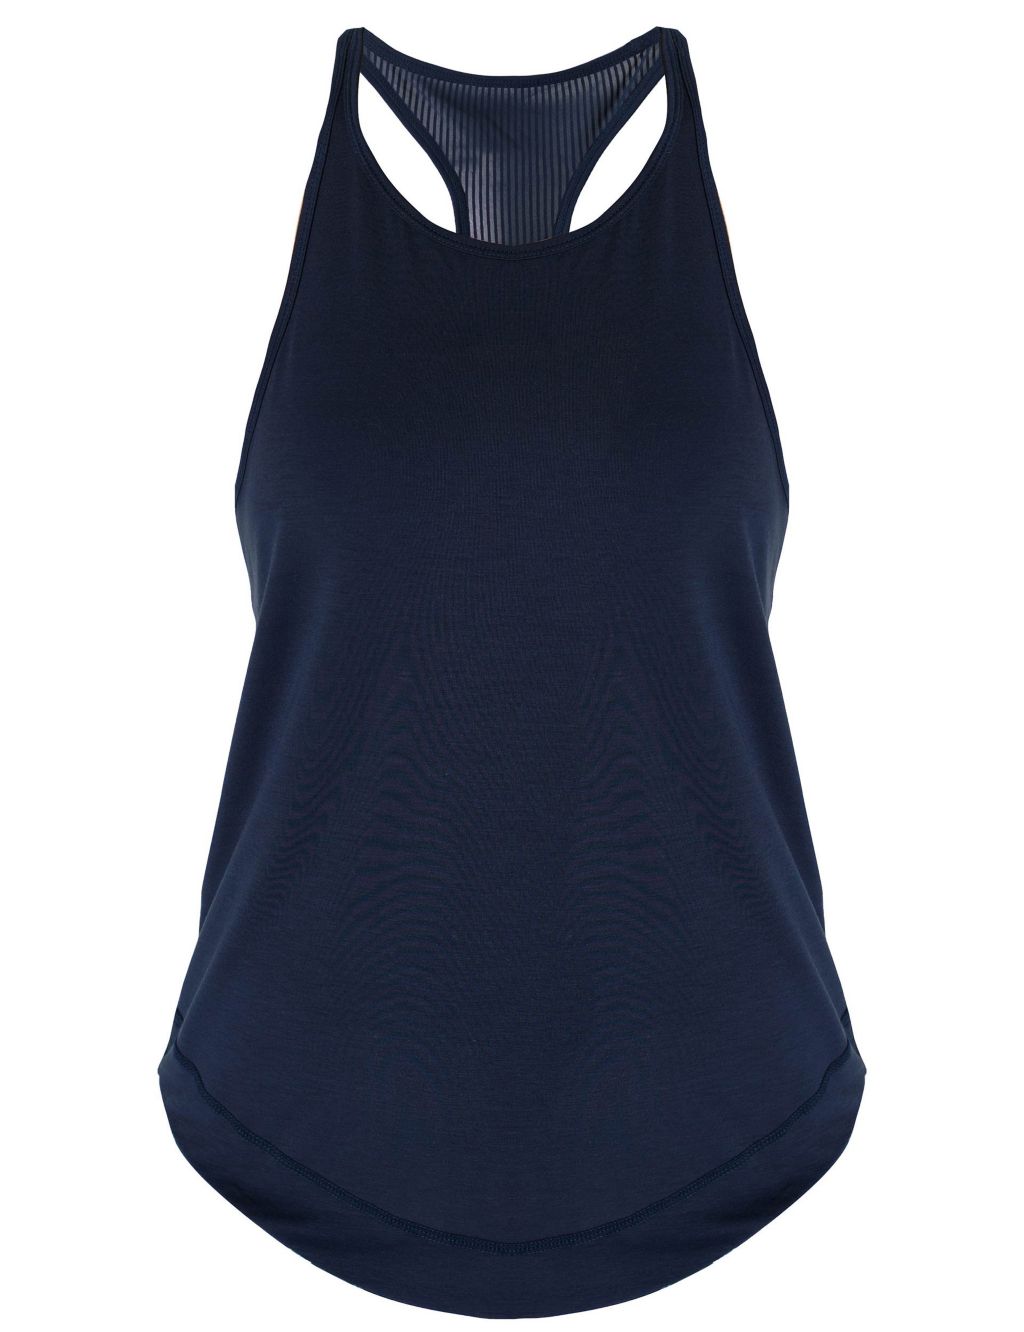 Breathe Easy Relaxed Vest Top image 2